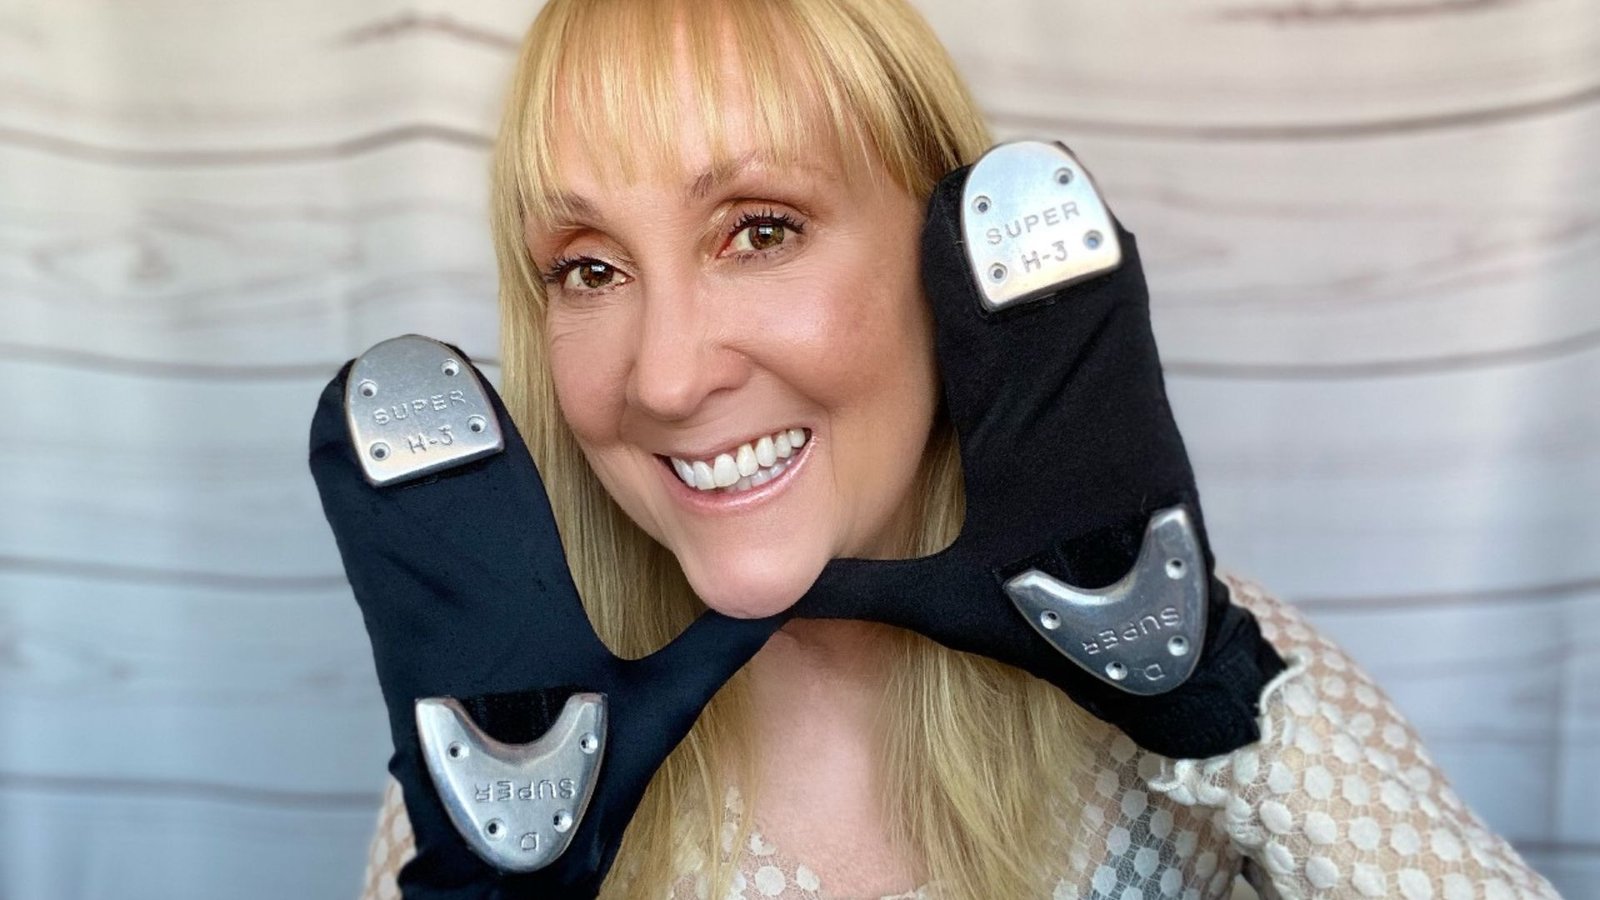 Victoria Moore smiling wearing tap gloves.